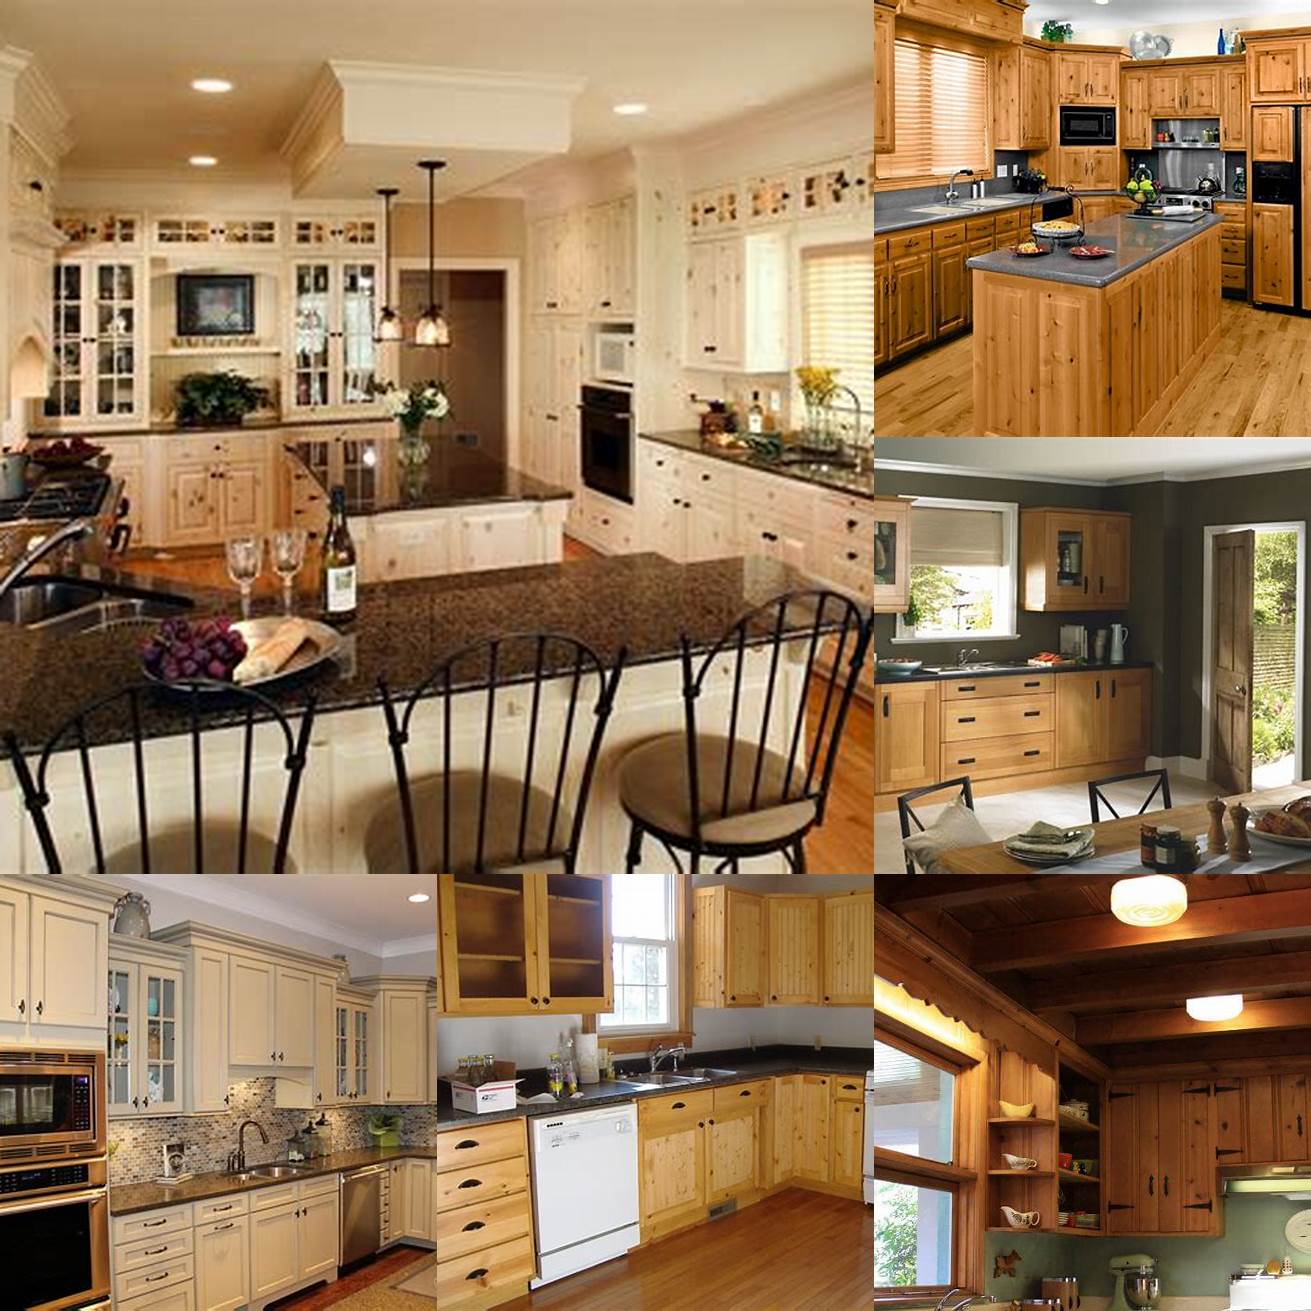 Pine cabinets can also work well in a contemporary kitchen when paired with sleek finishes and neutral colors